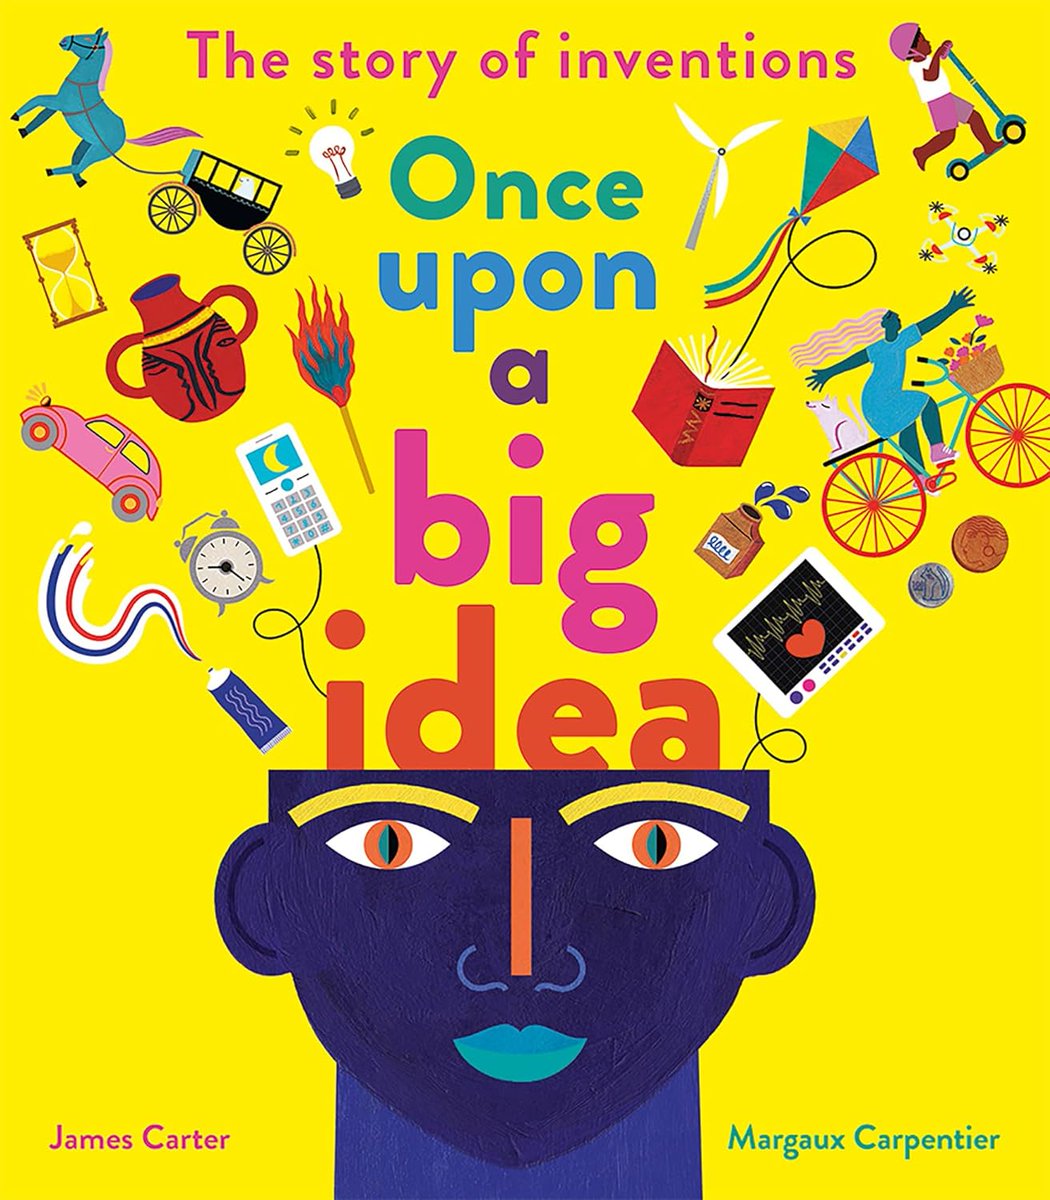 Take a trip from the Stone Age to our modern world & explore fantastic human creations in @jamescarterpoet & #MargauxCarpentier’s exciting book #OnceUponaBigIdea @books4mine @LittleTigerUK  pamnorfolkblog.blogspot.com Review also @leponline later this week!